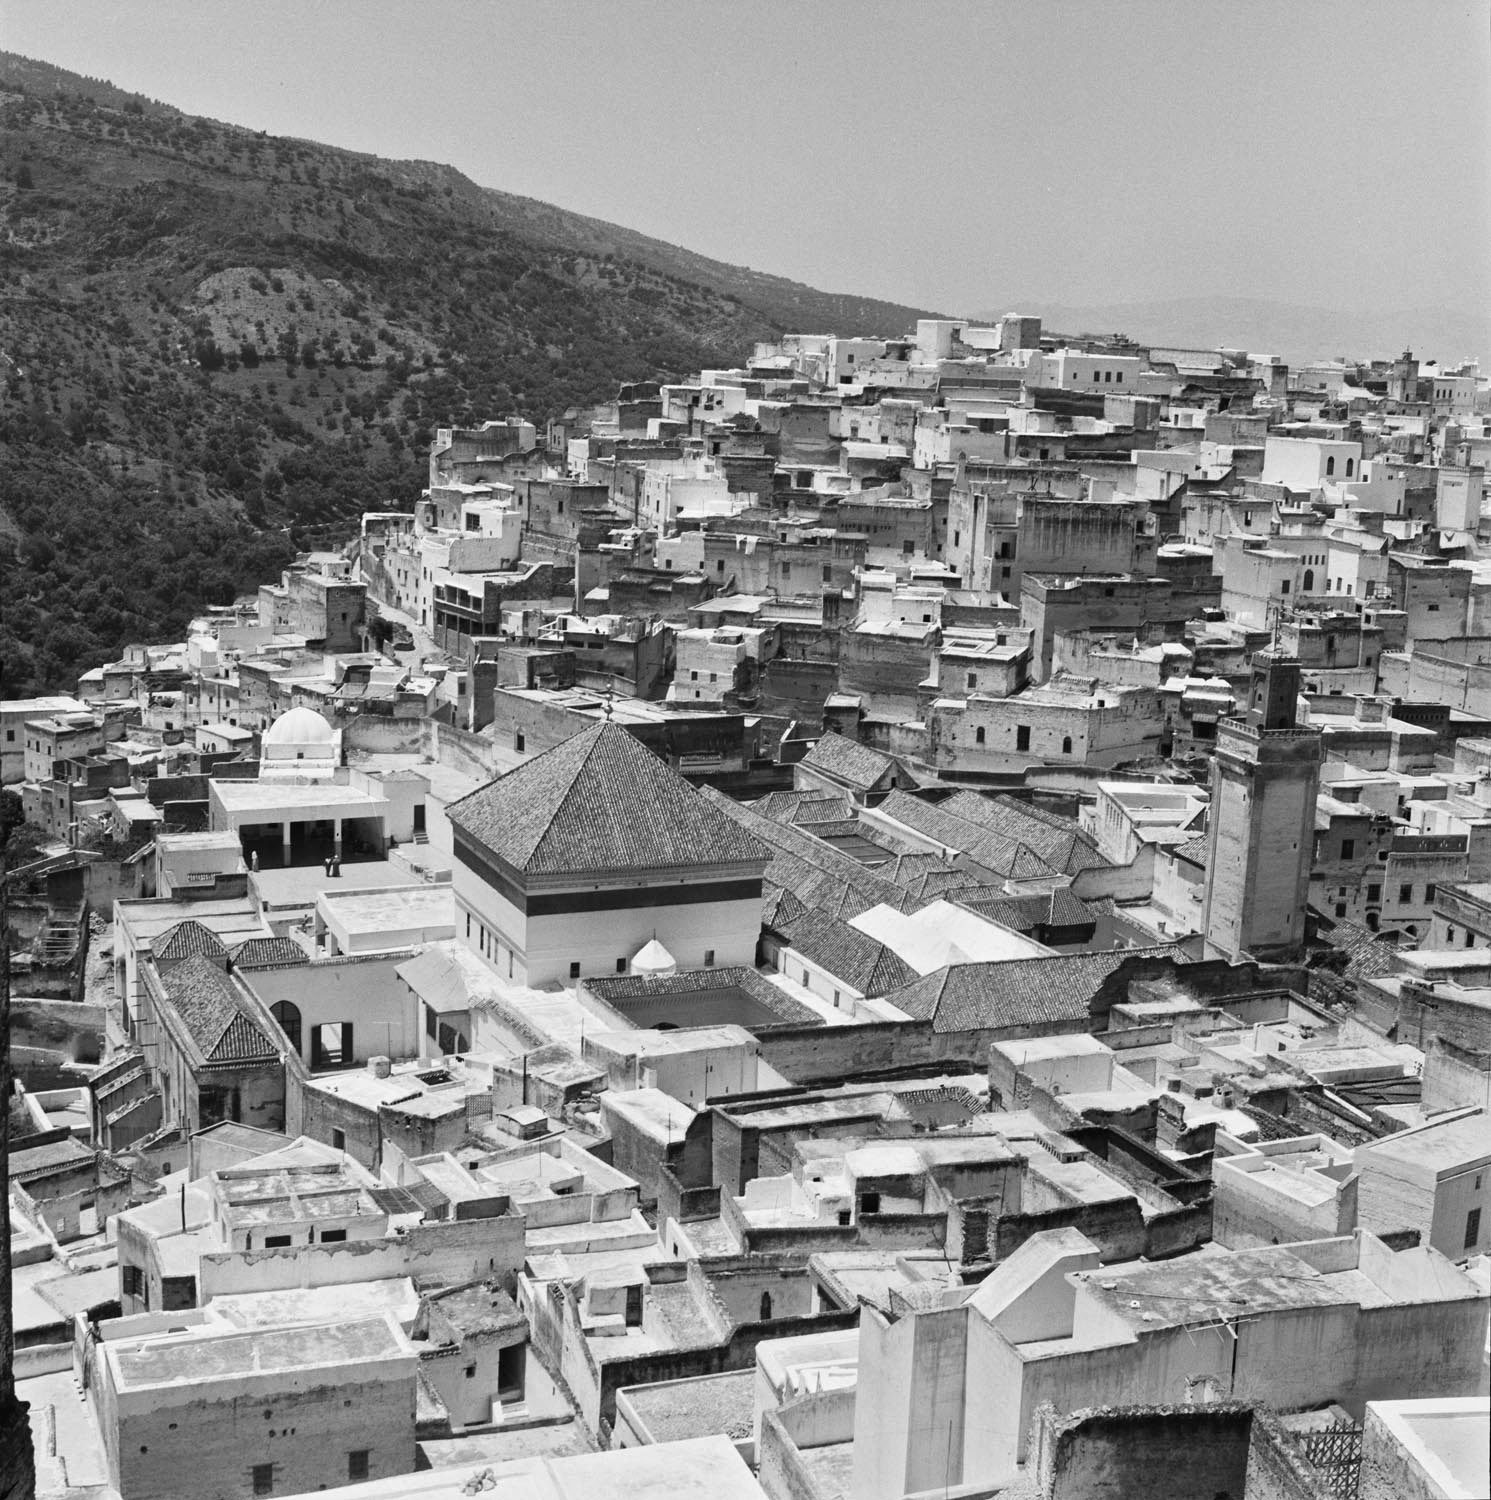 Bird's eye view of Moulay Idris Zerhoun, with the Moulay Idris Shrine in the center